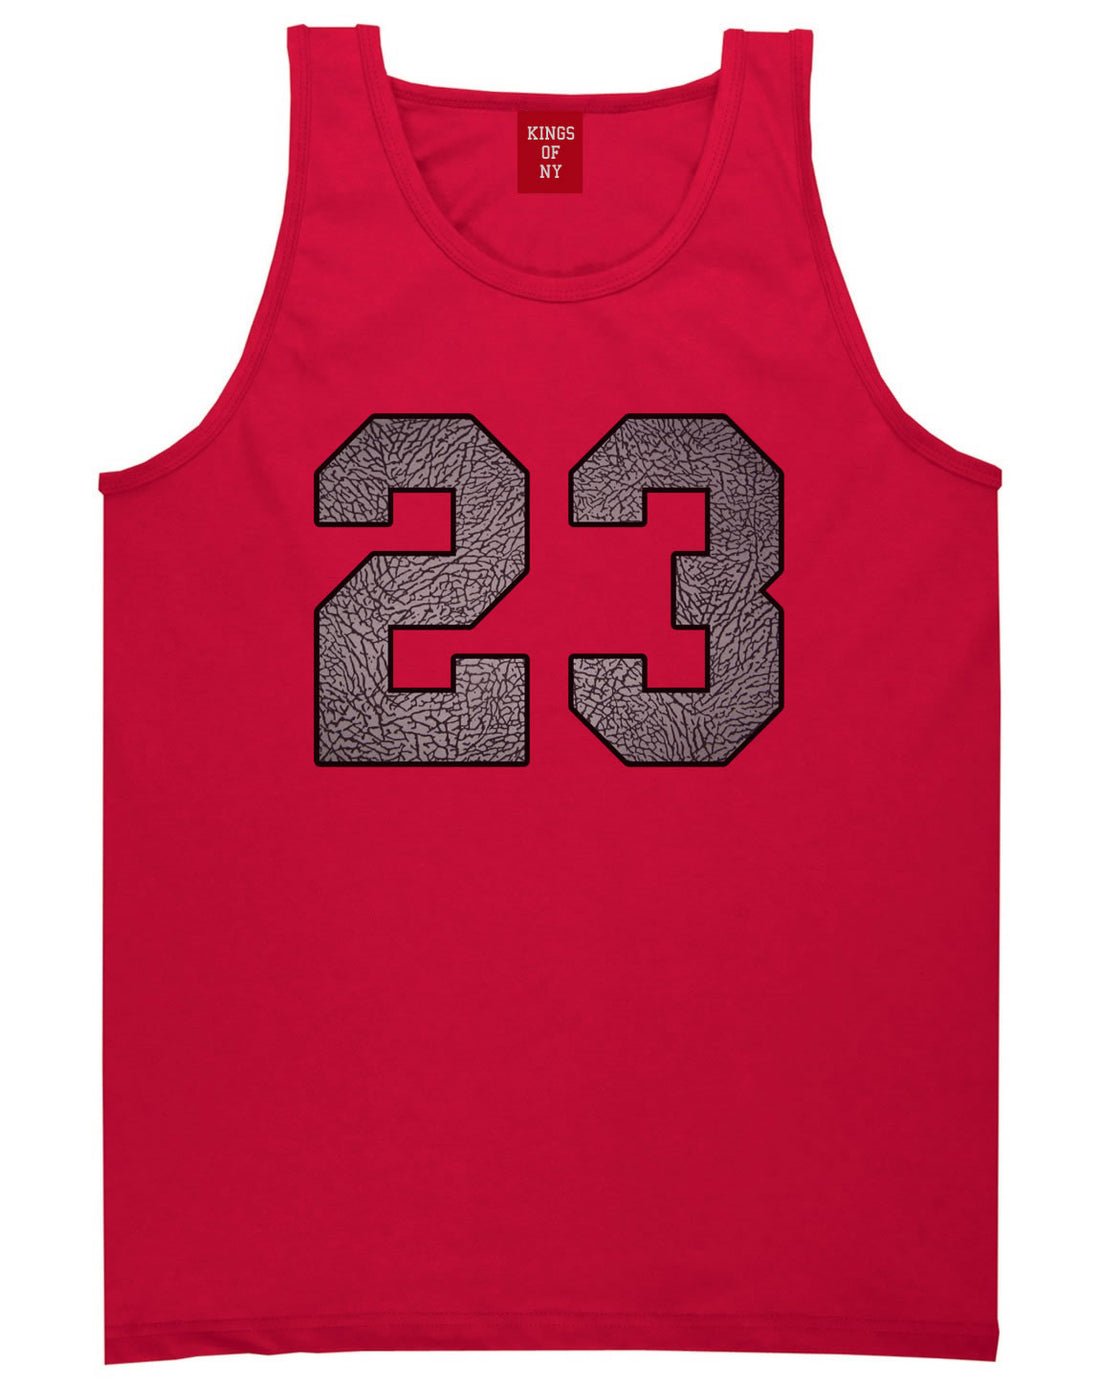 23 Cement Jersey Tank Top in Red By Kings Of NY